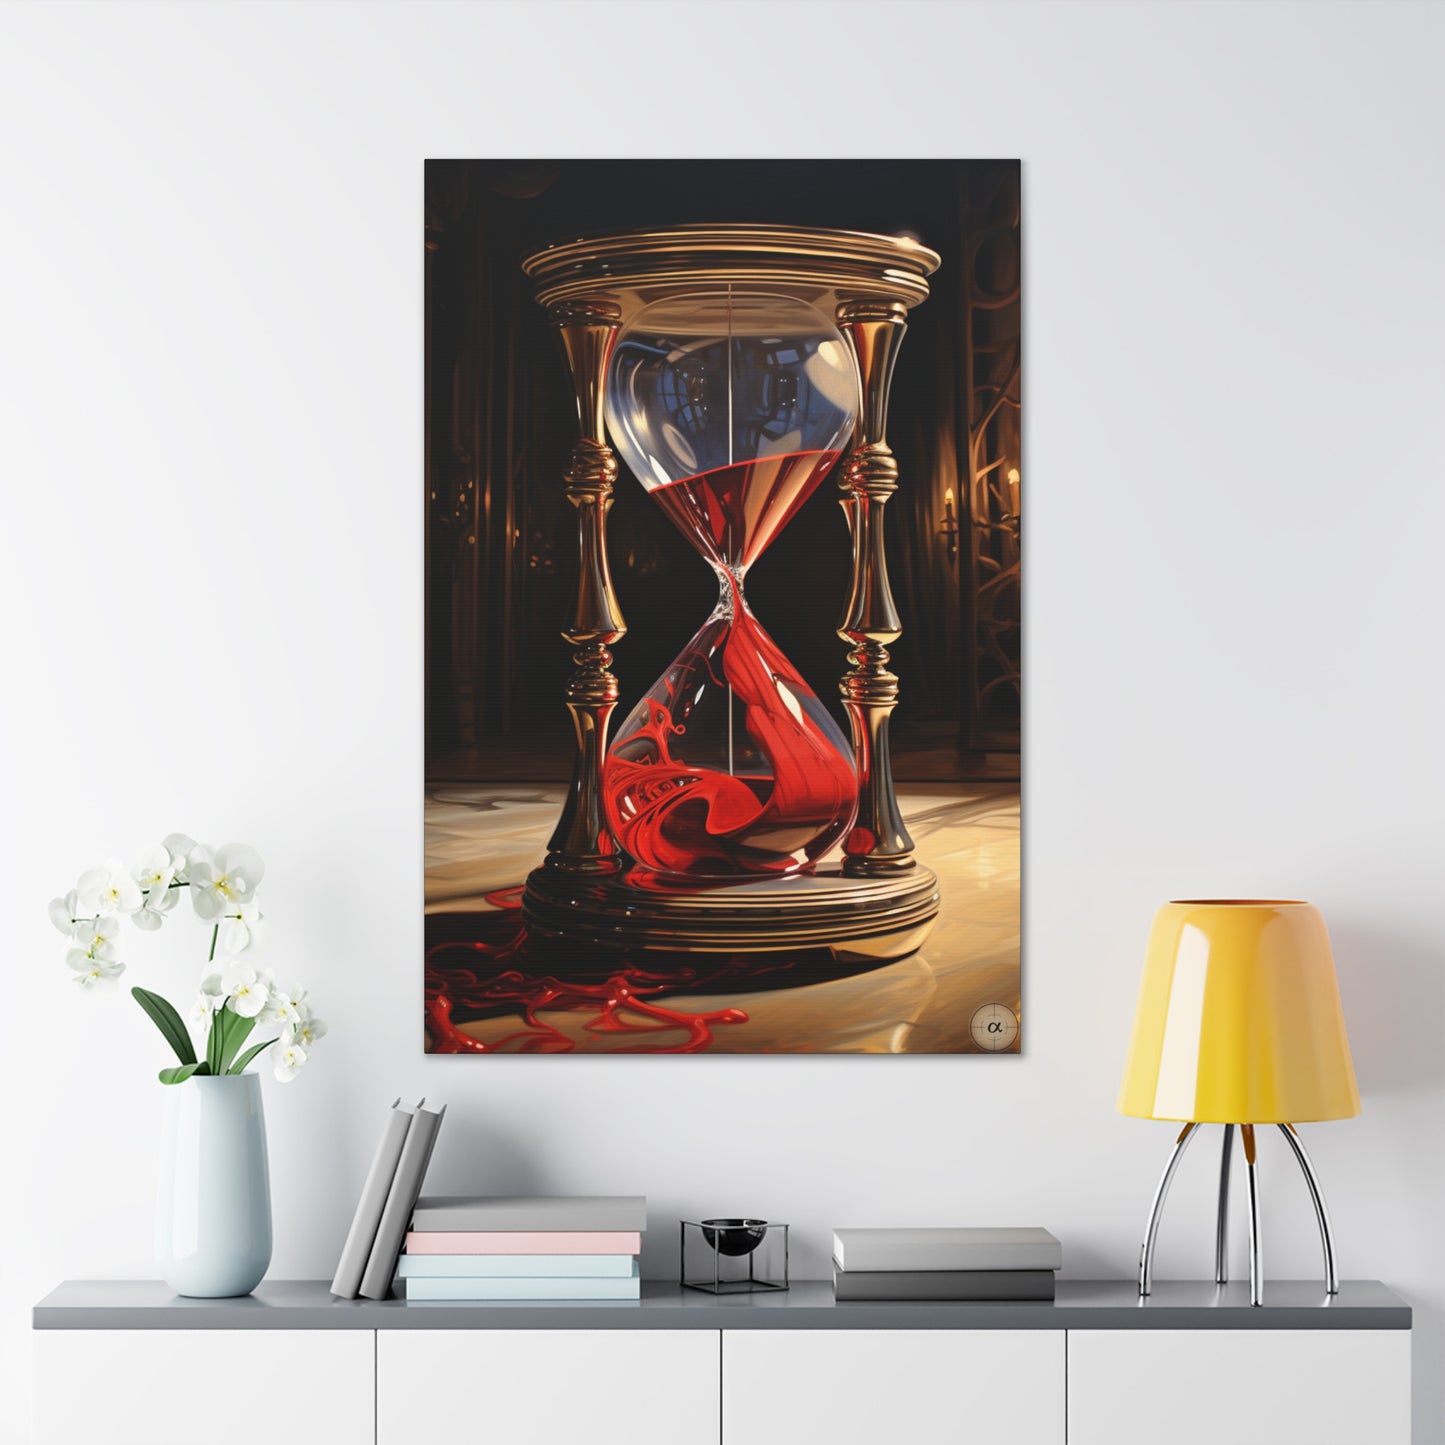 Art by Kendyll: "The Blood of Time" on Canvas